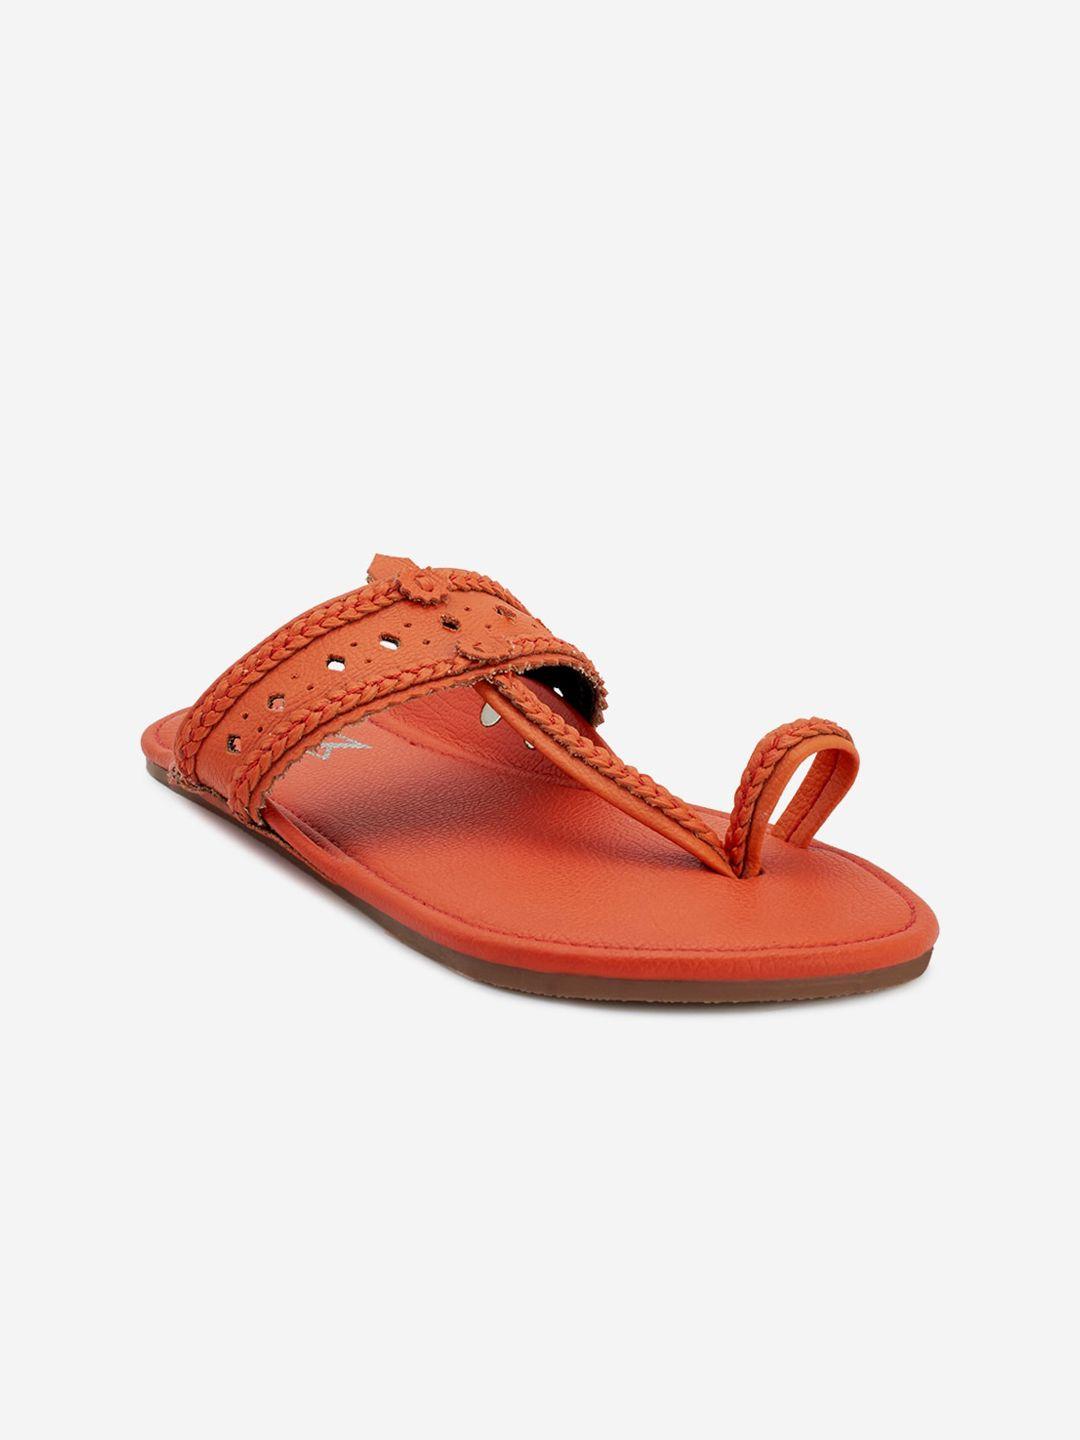 the madras trunk women orange one toe flats with laser cuts